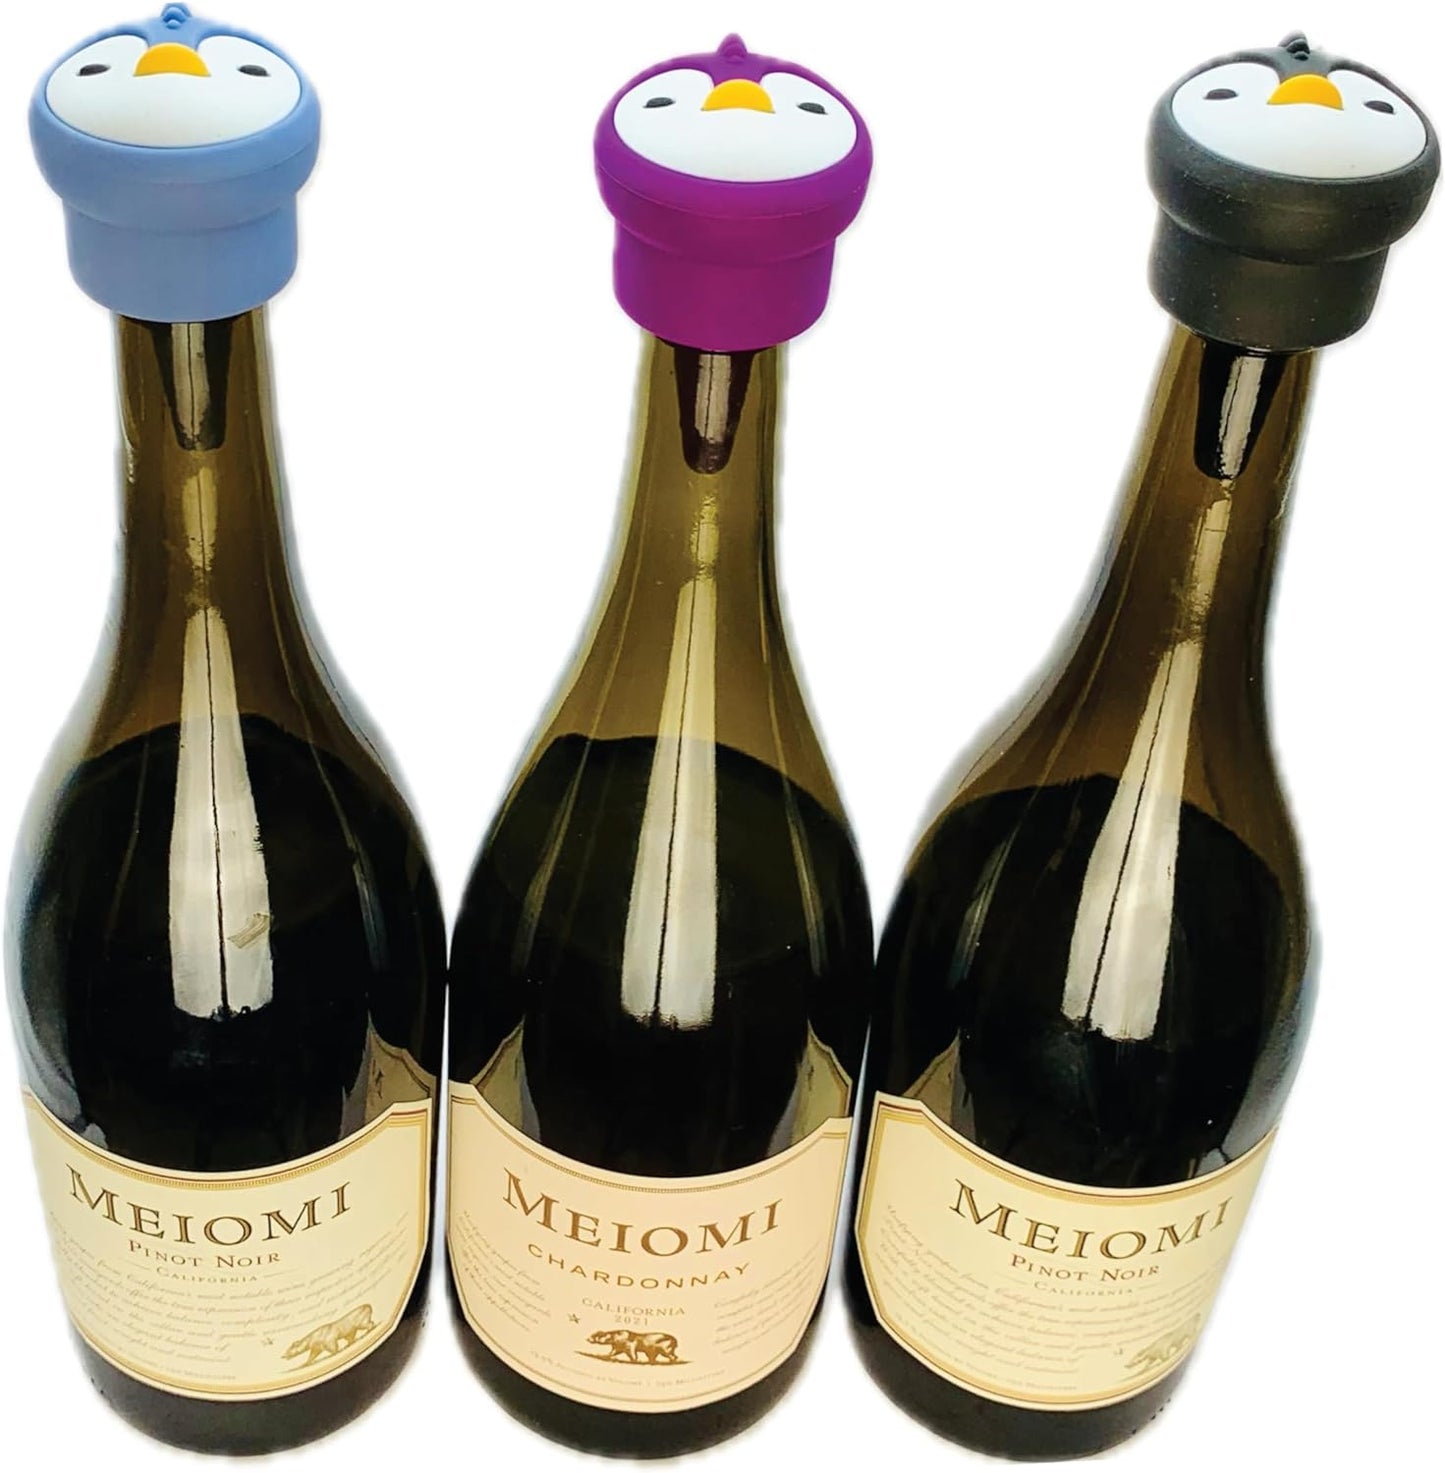 Corky Winers - Penguin Silicone Wine Stoppers - Versatile, Leakproof New Double Seal Design, and Easy to Use for Wine, Oils, and More - Colorful Trio Pack (Black, Purple, Blue) - BPA Free Silicone